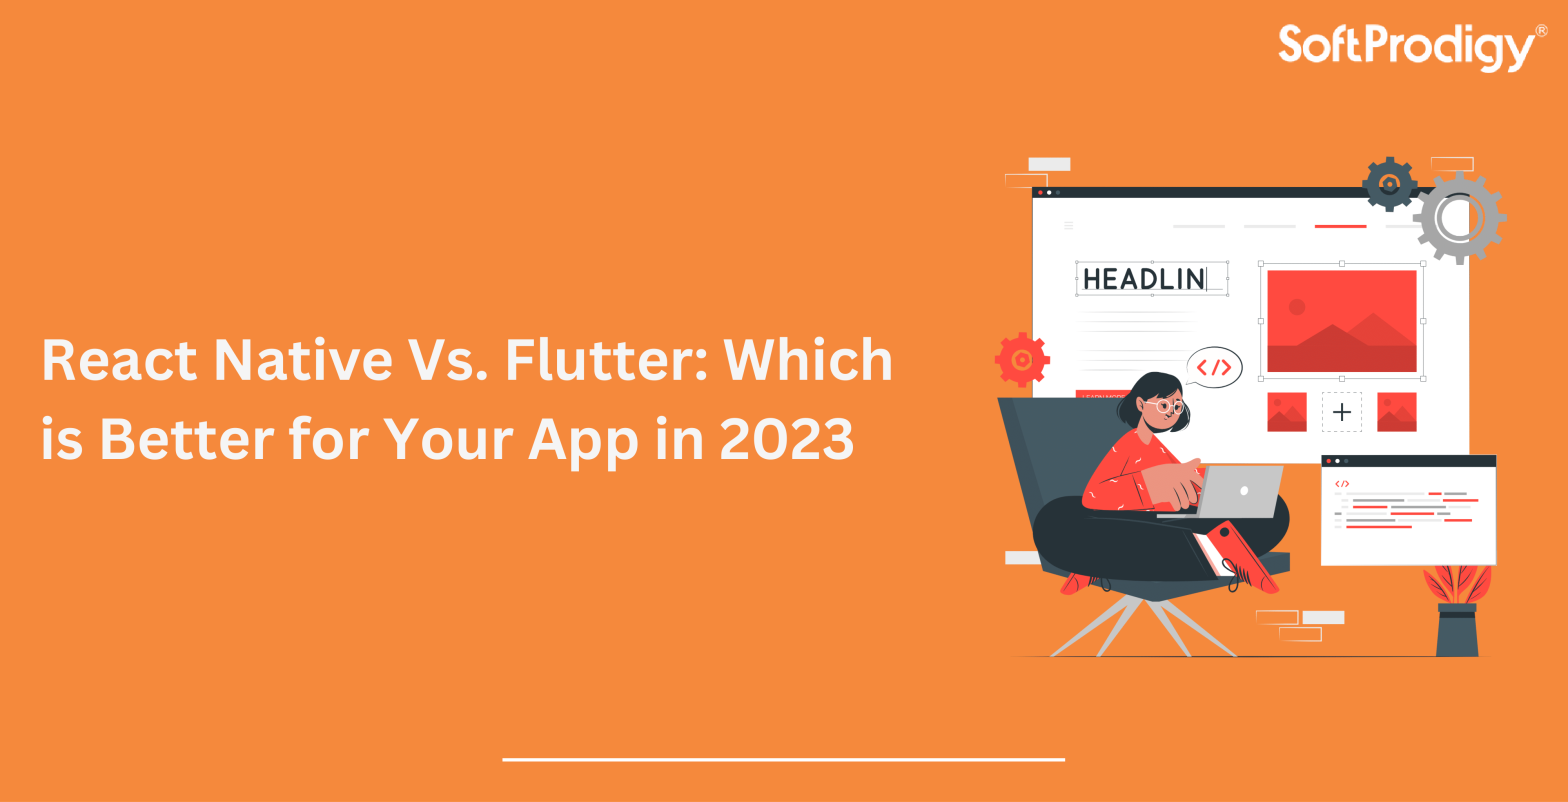 React Native Vs. Flutter: Which is Better for Your App in 2023